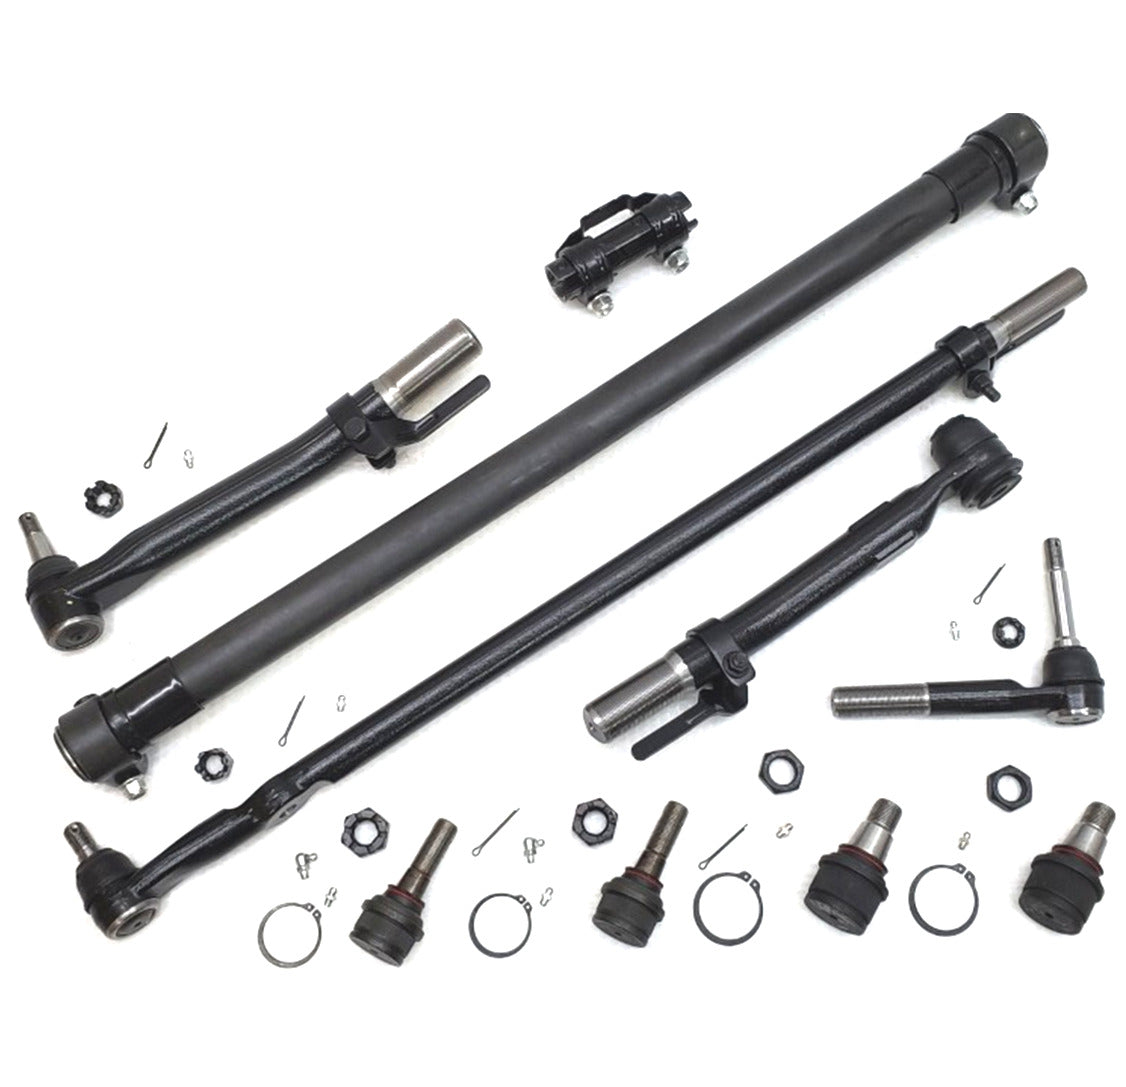 HD Ball Joint Drag Link Tie Rod Link Steering Kit for 2011-2016 Ford F250, F350 4x4 SRW